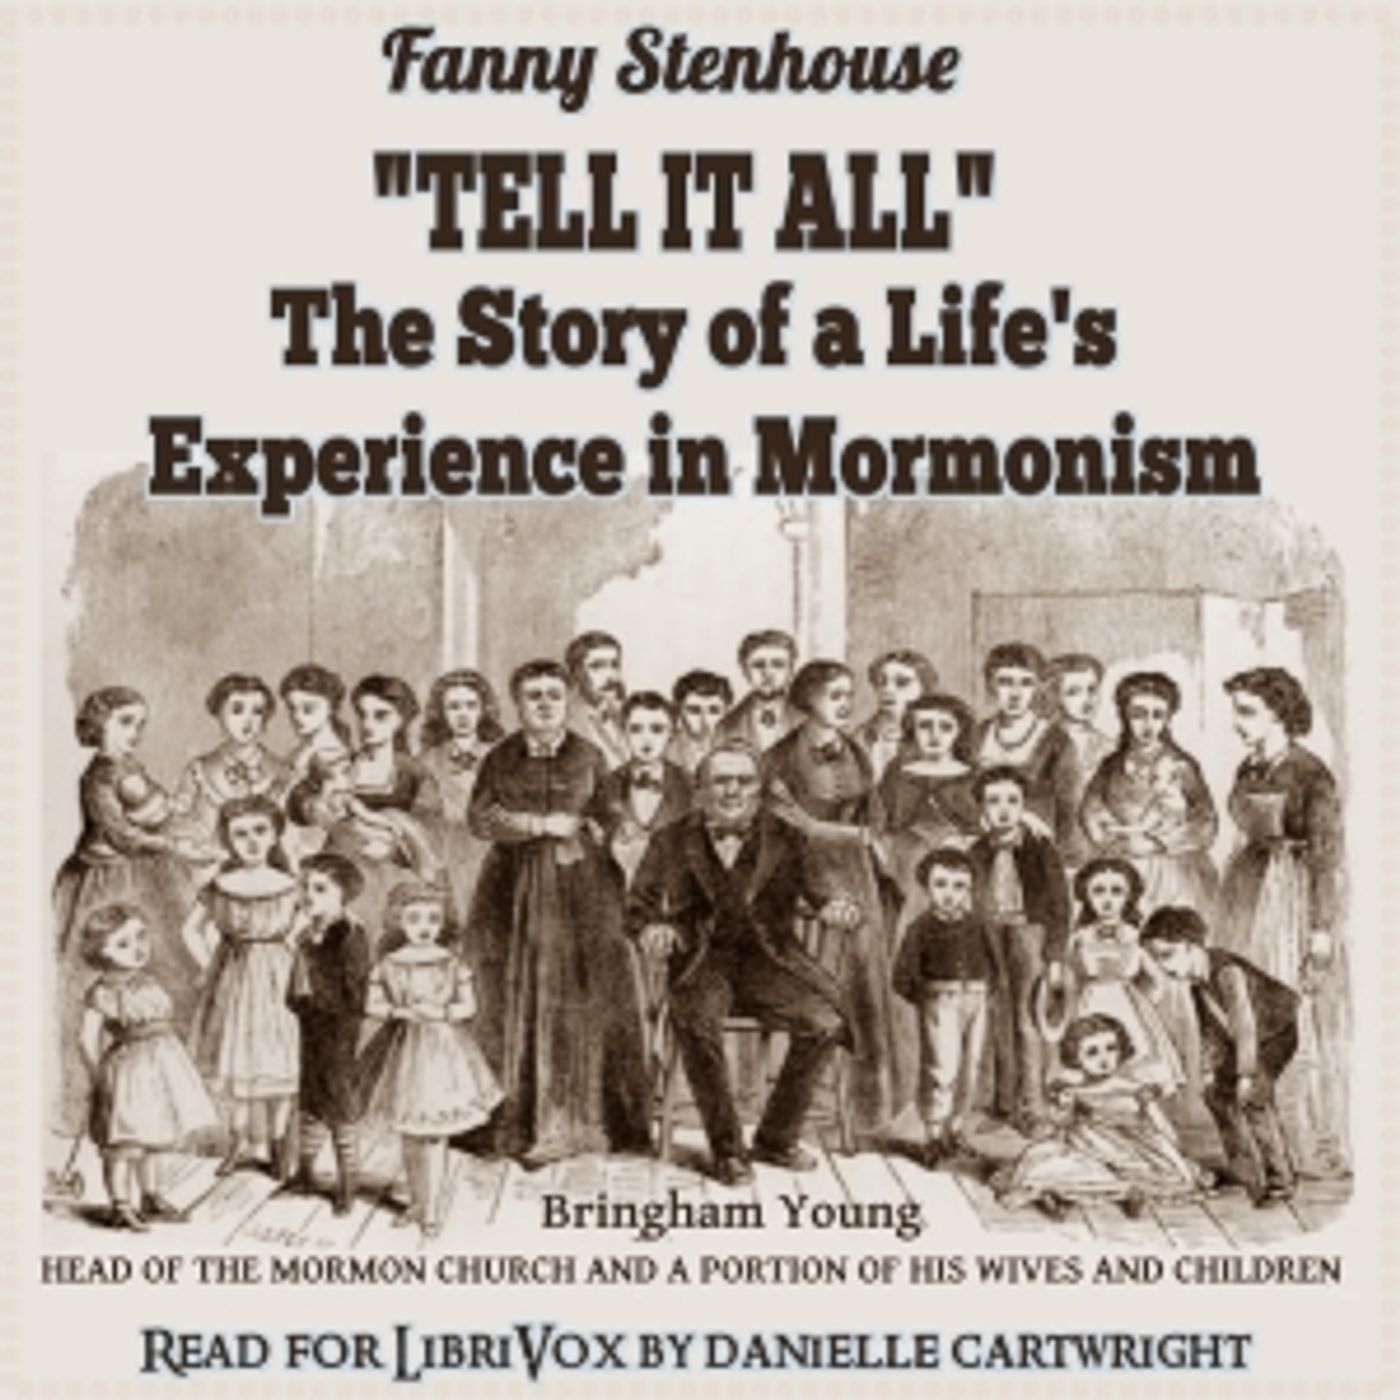 ”Tell It All”: The Story of a Life’s Experience in Mormonism by Fanny Stenhouse (1829 – 1904)